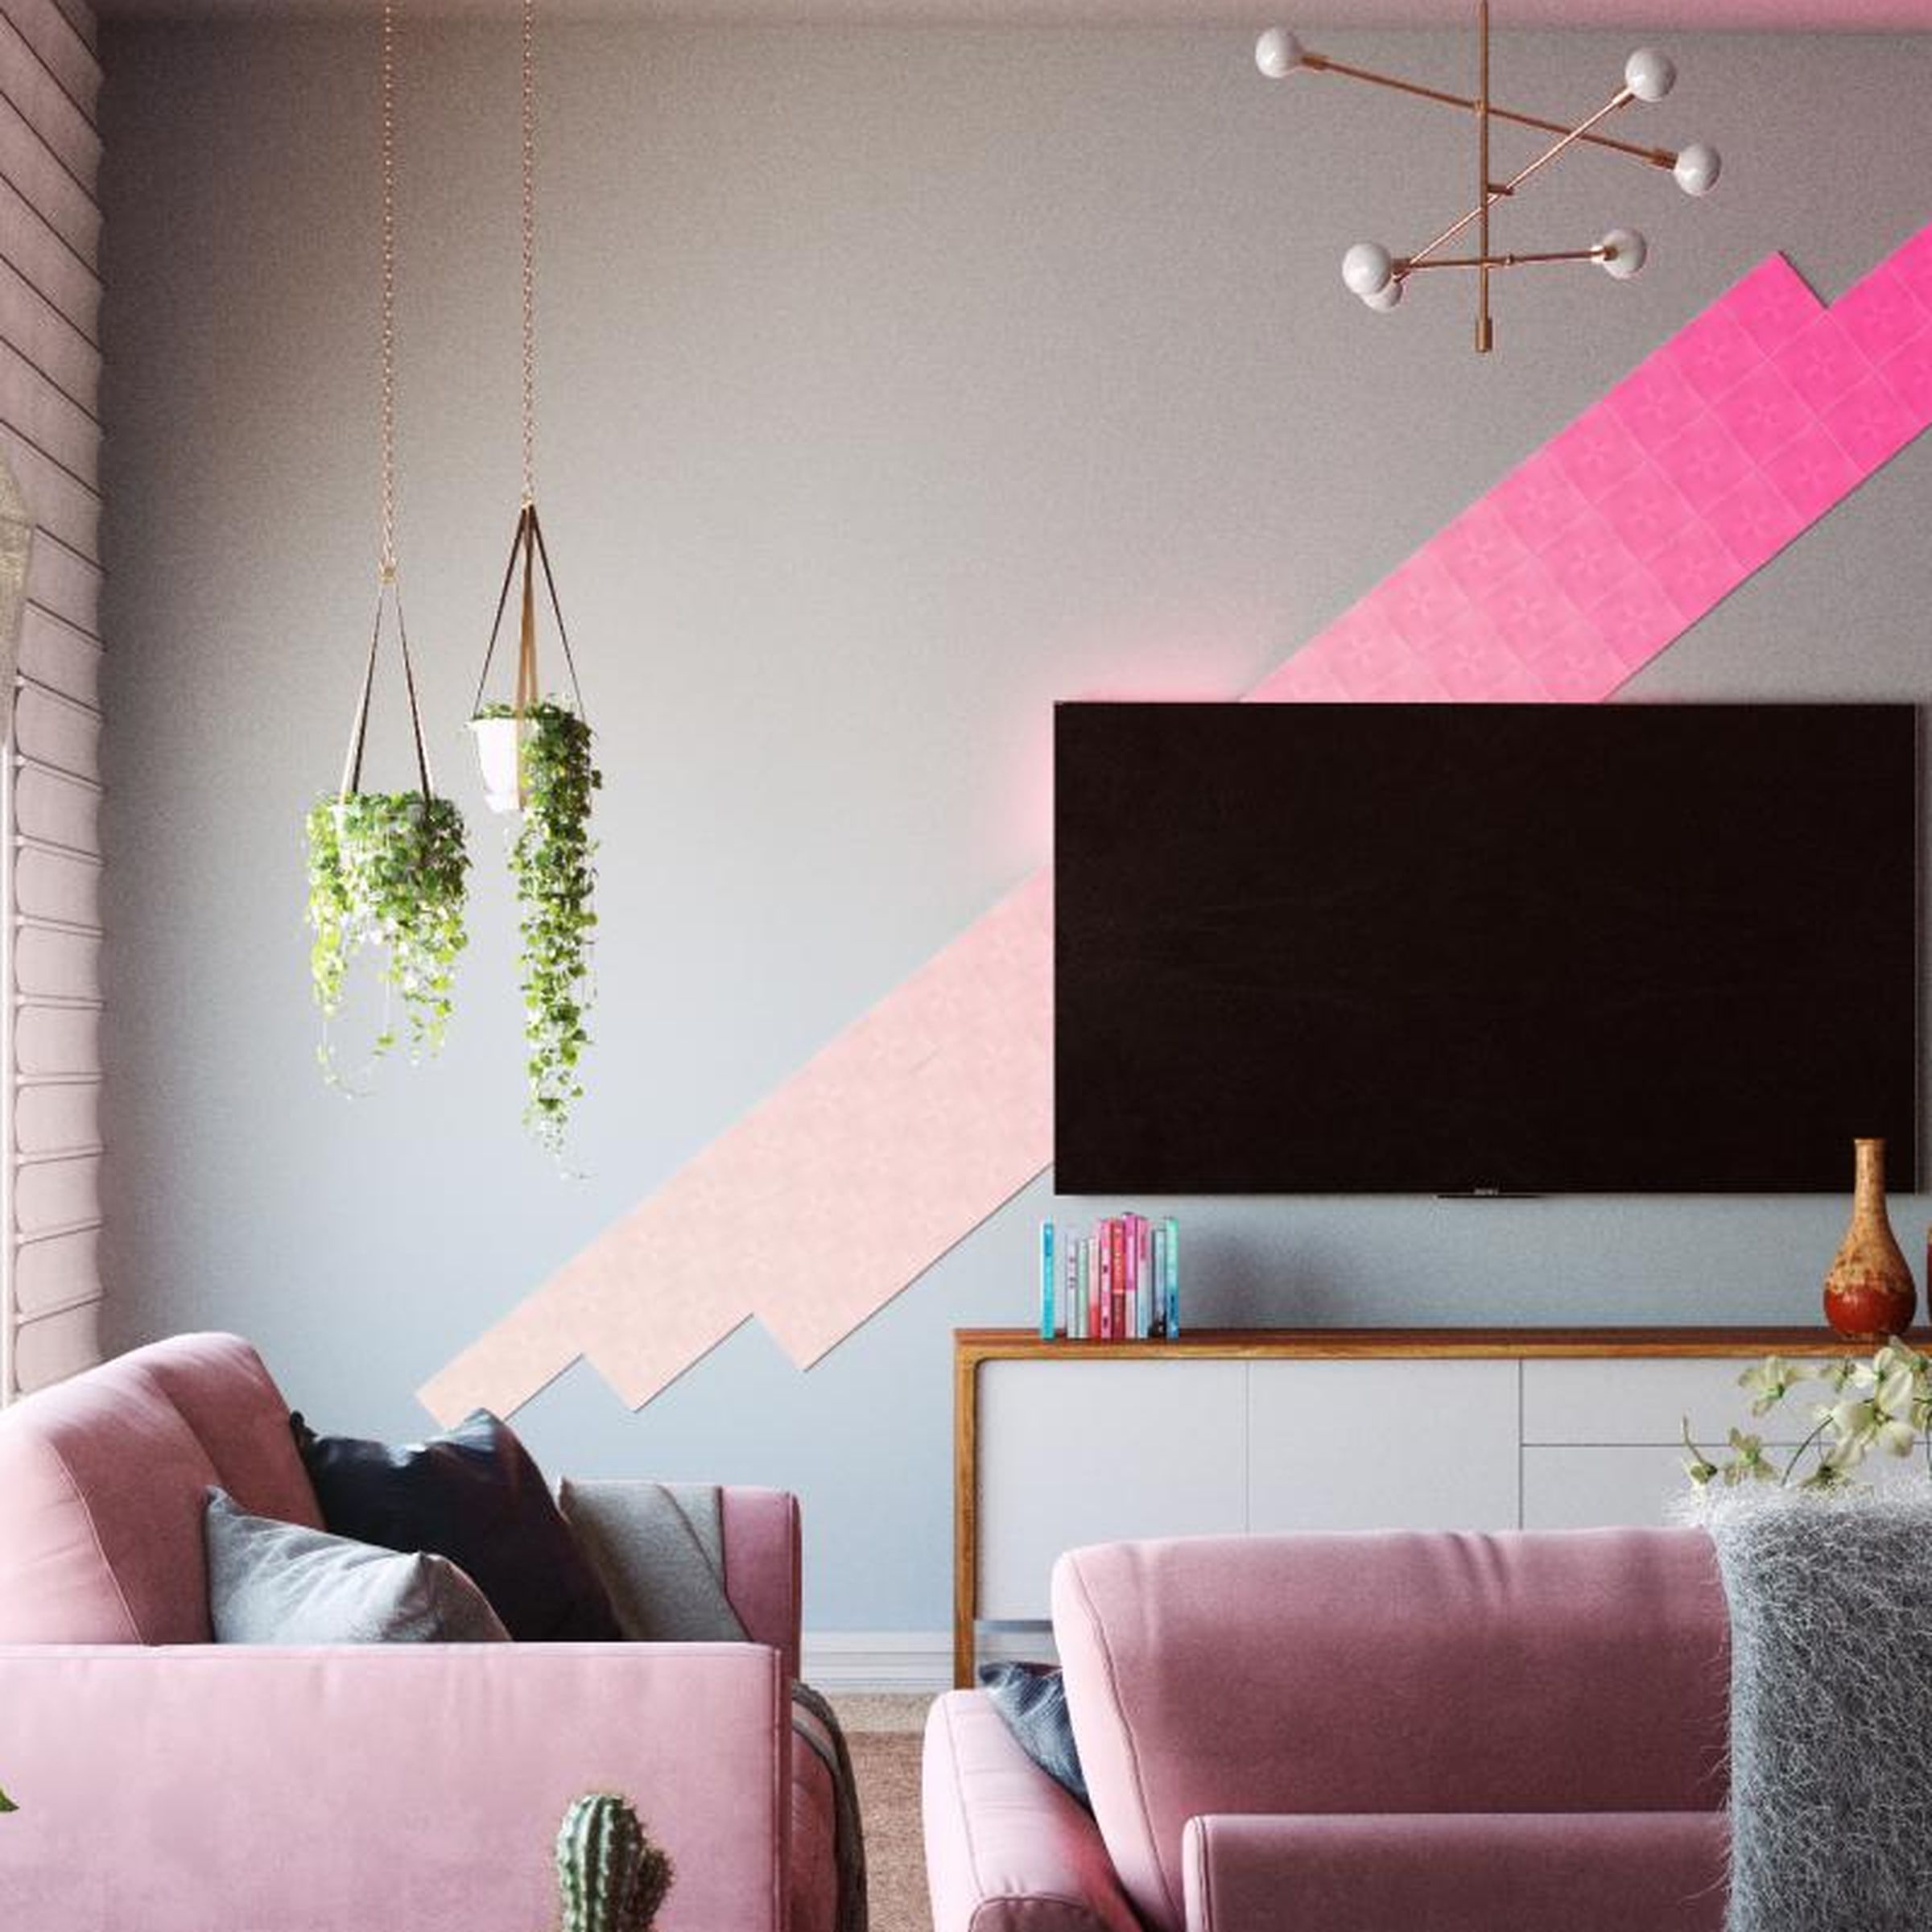 Nanoleaf’s canvas light panels are easy to set up and can display more than 16 million colors.